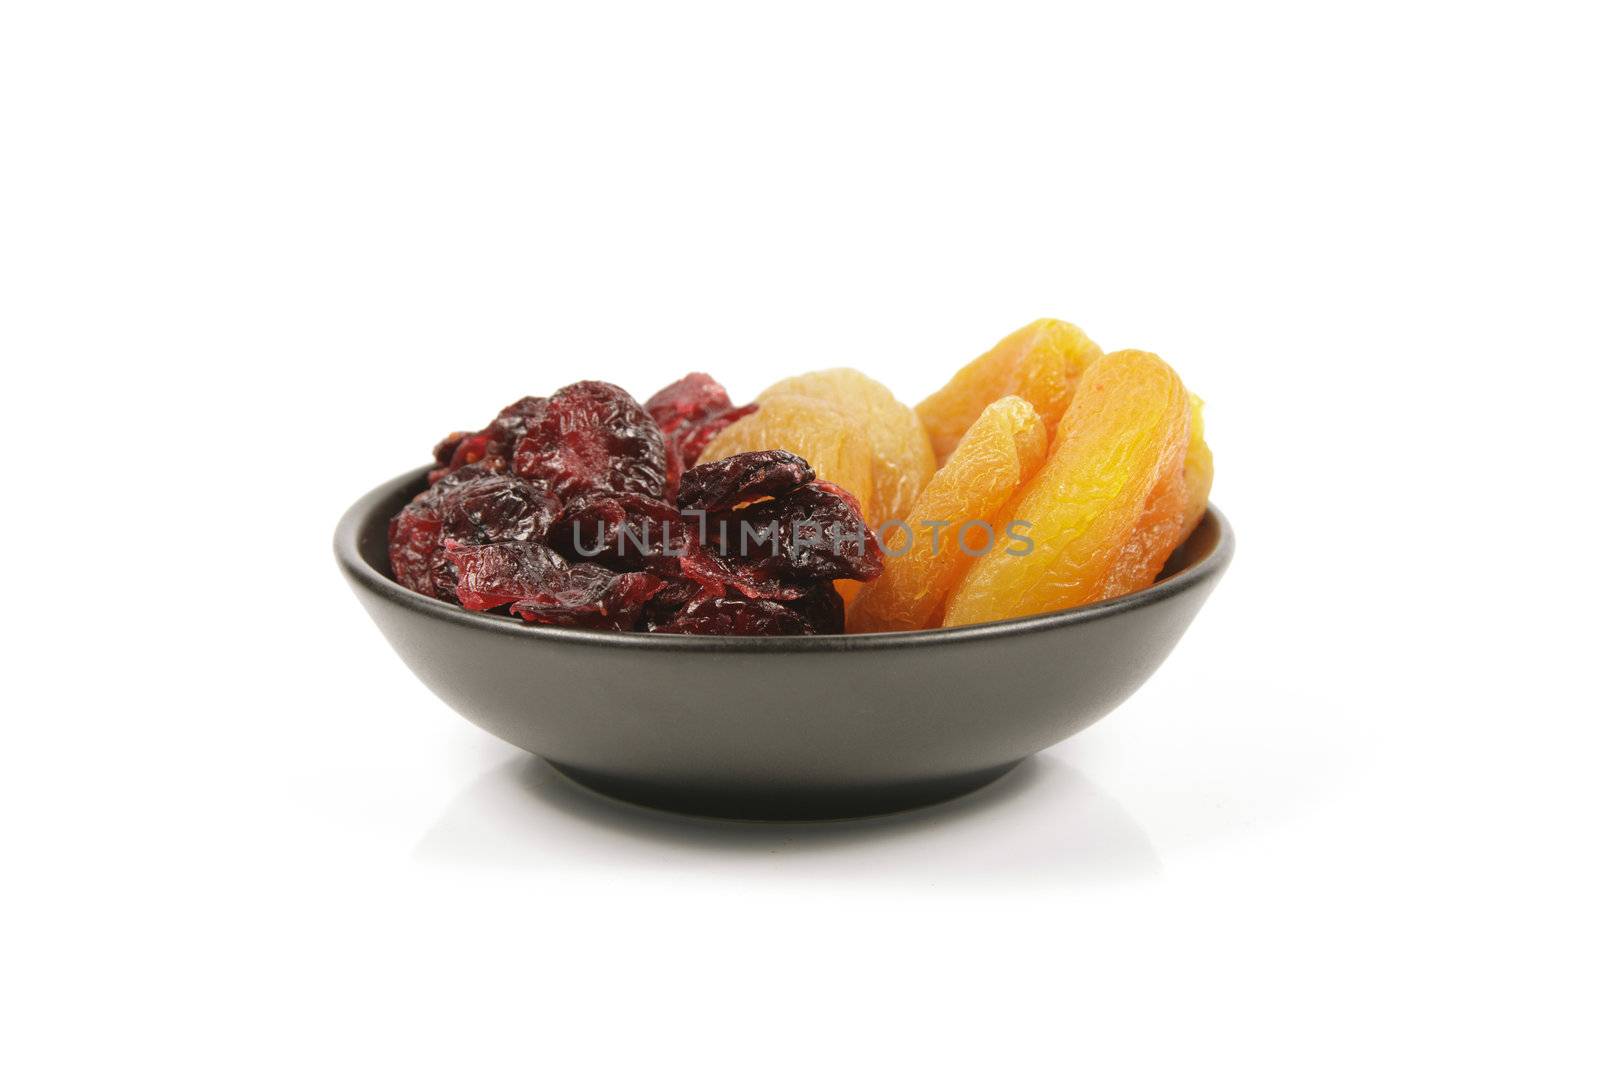 Red ripe dried cranberries and dried apricots in a small black bowl on a reflective white background